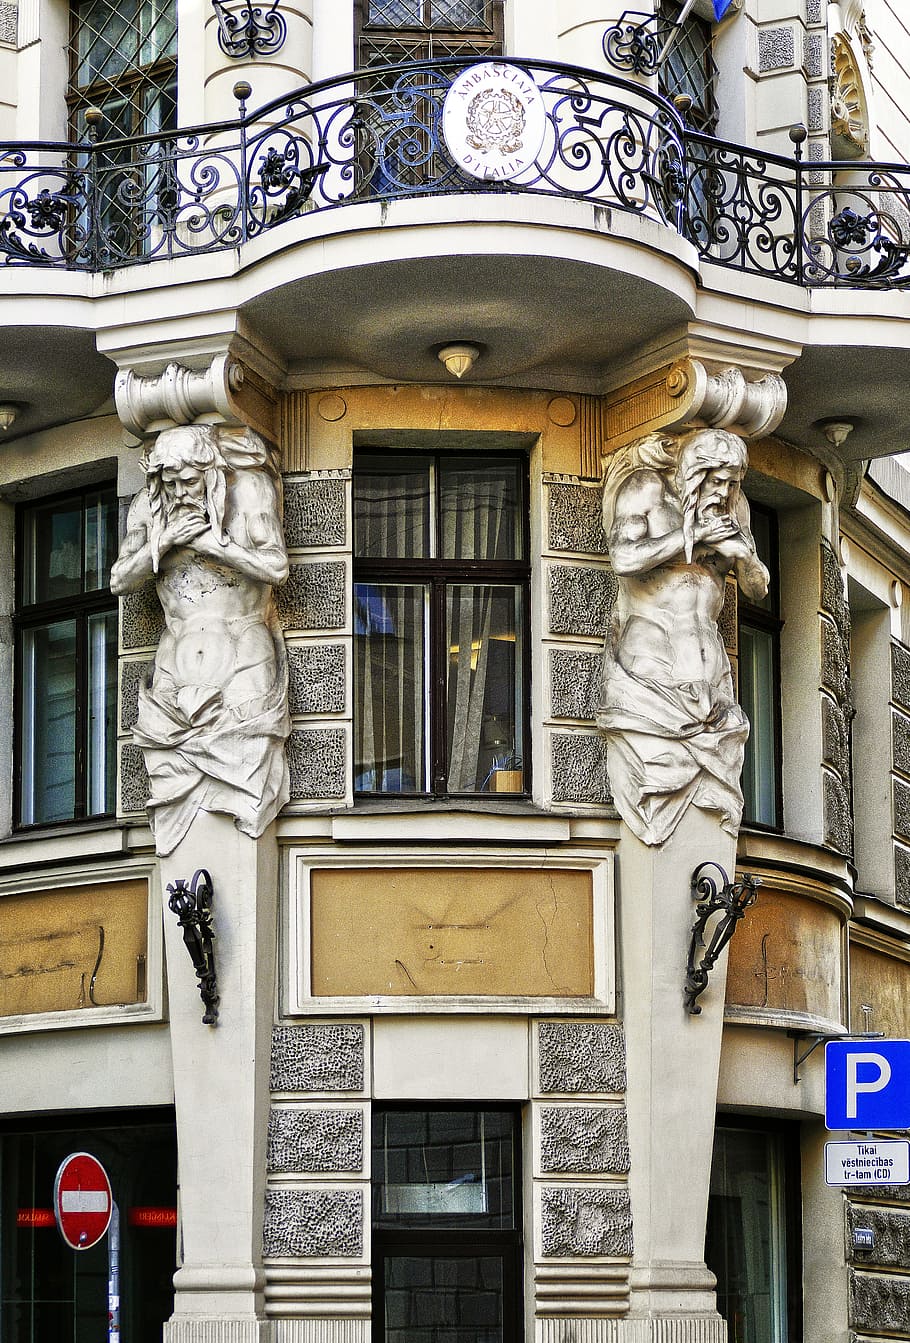 art nouveau, facade, architecture, house facade, building, playful, playfulness, secessionists, consulate, embassy